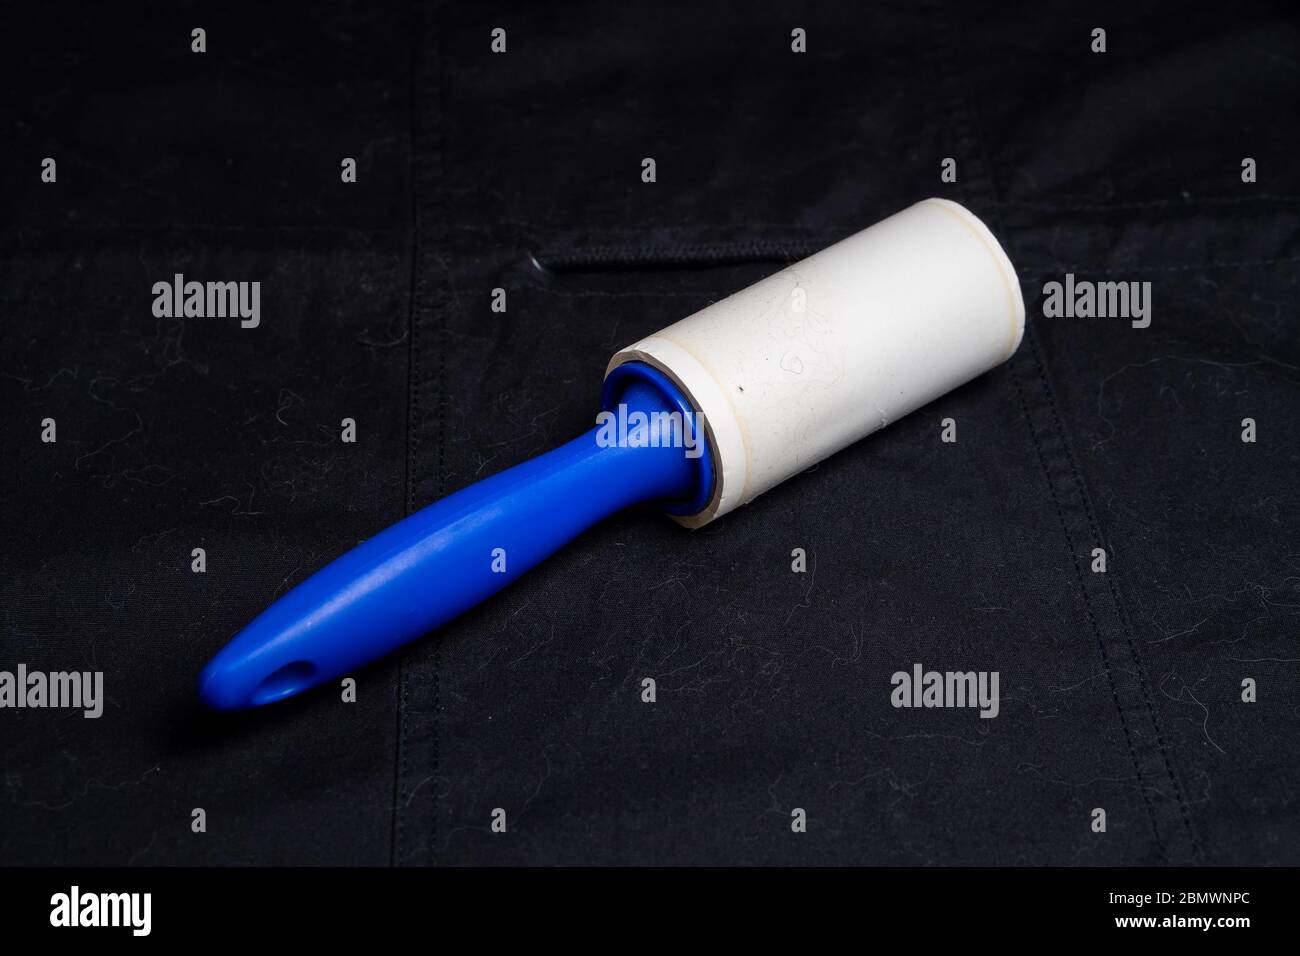 Adhesive roller for cleaning cloth on a black cloth Stock Photo